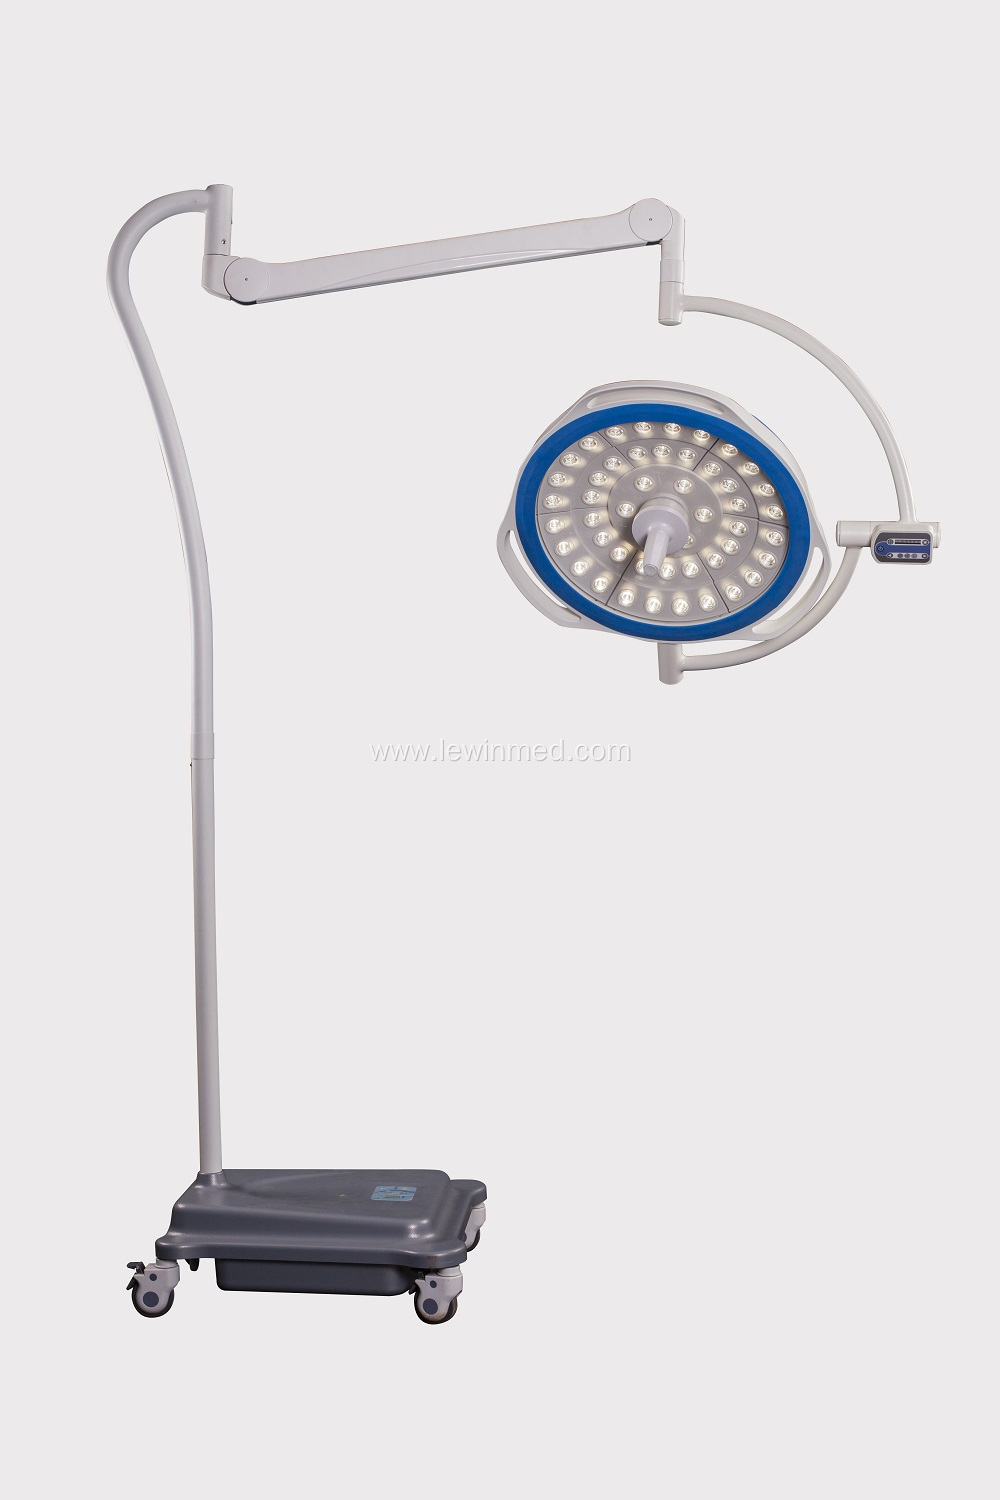 Floor type LED Operating Lamp with wheels